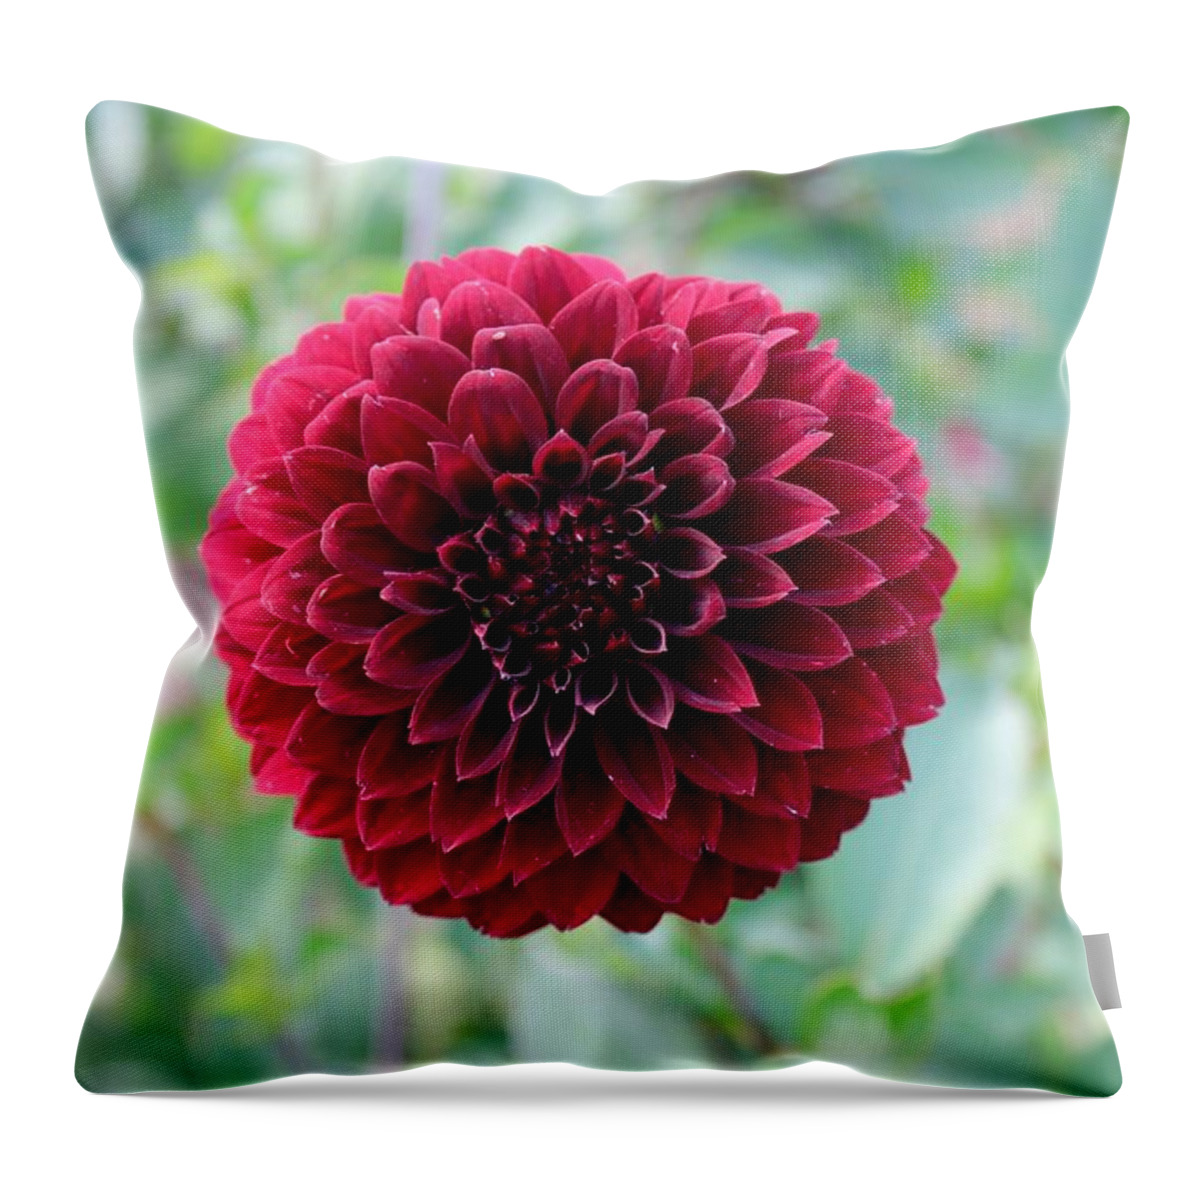  Dahlia Throw Pillow featuring the photograph Red Dahlia by Brian Eberly